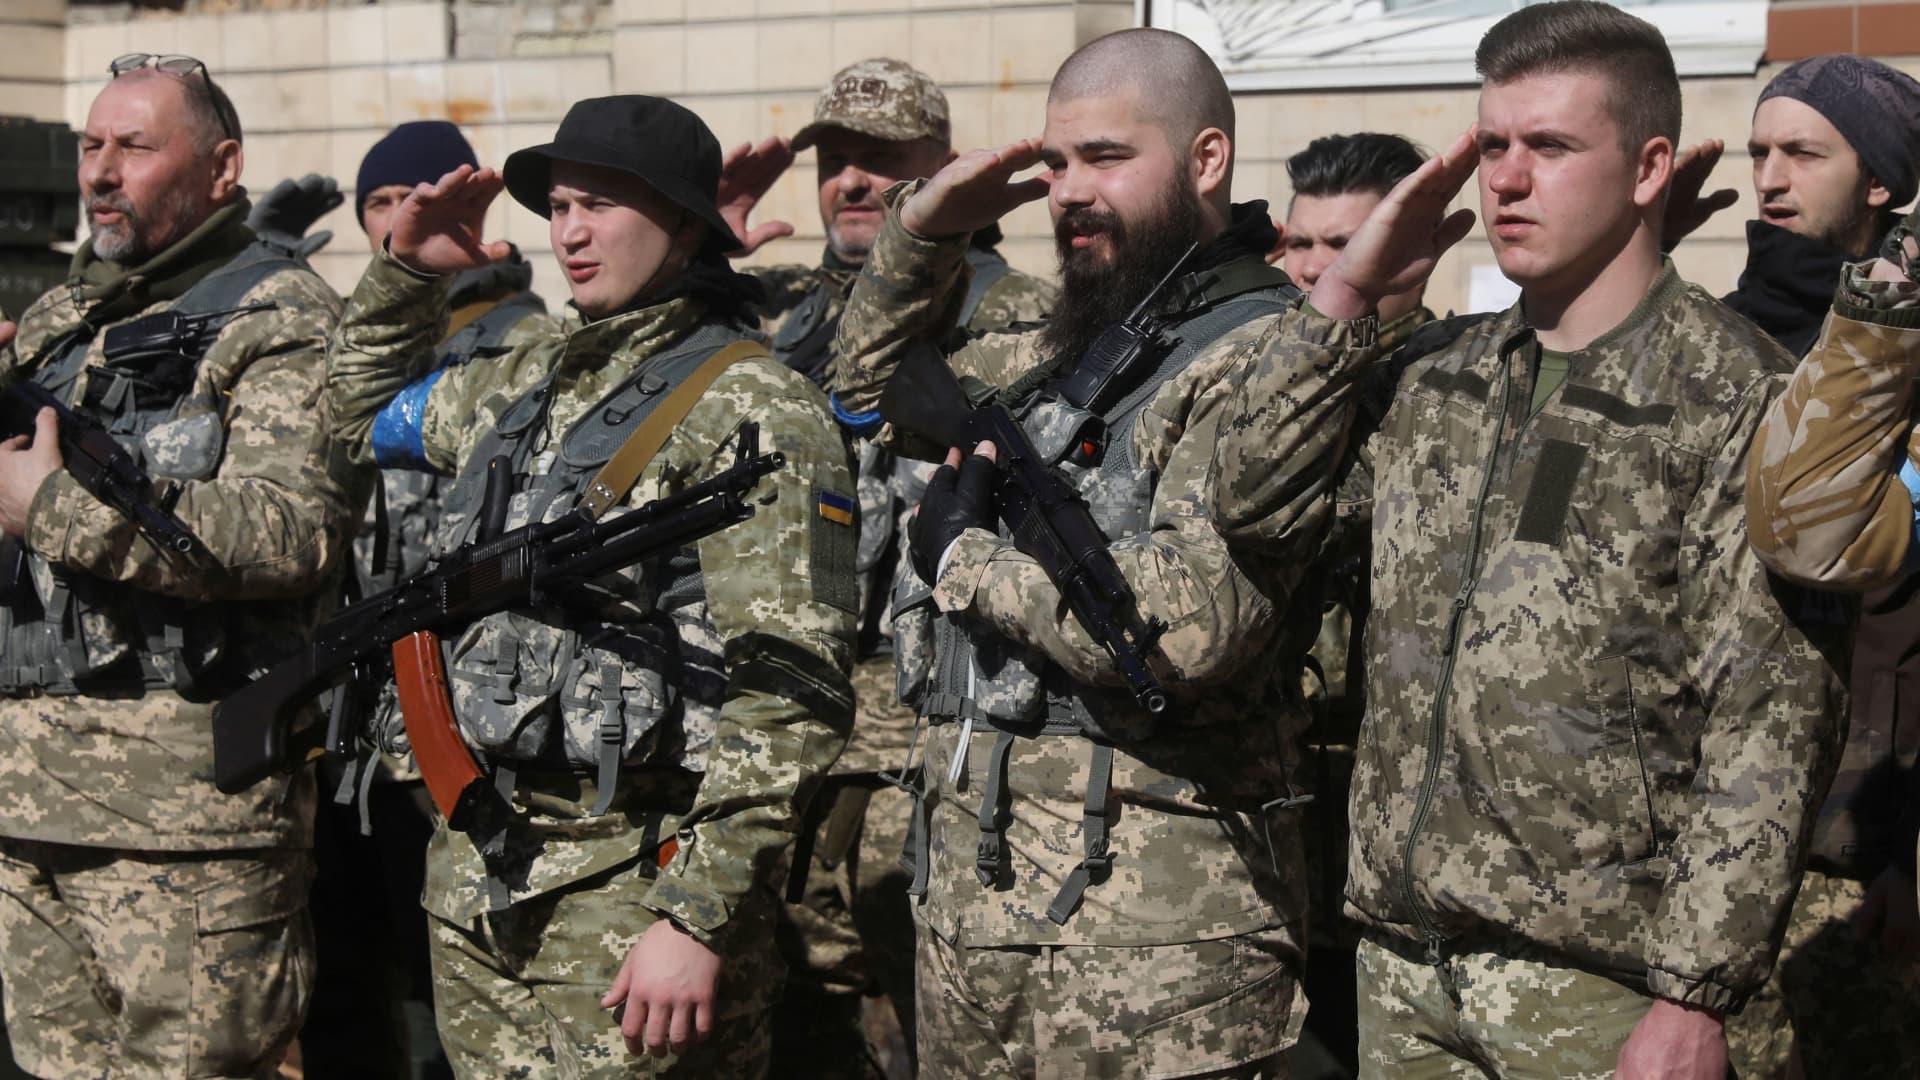 Members of the Ukrainian Territorial Defense Forces take an oath to defend the country, as Russia's invasion of Ukraine continues, in Kyiv, Ukraine March 14, 2022.